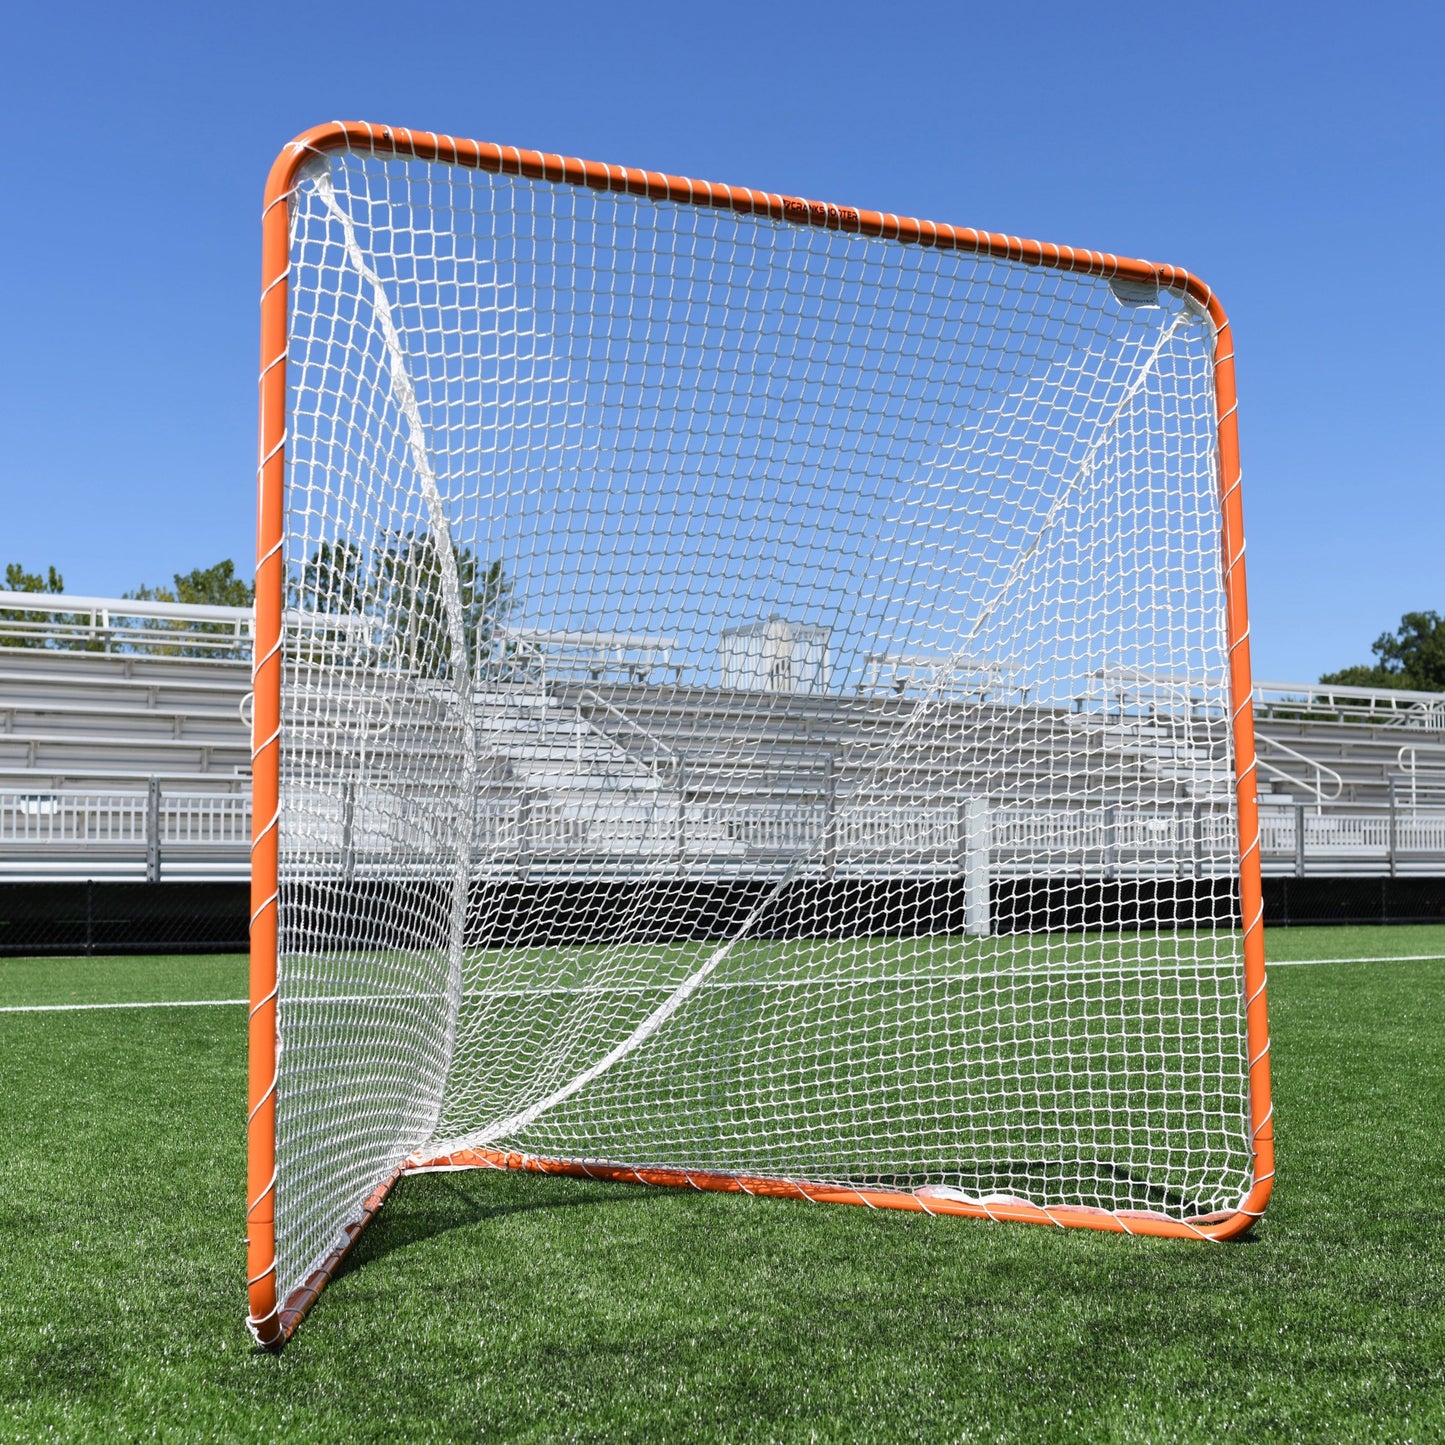 Backyard/Youth Practice Lacrosse Goal & 4mm Net COMBO Practice Goal  6'x6'x7' by Crankshooter® 21 lbs - Includes Tough 4mm White Net - Free Shipping